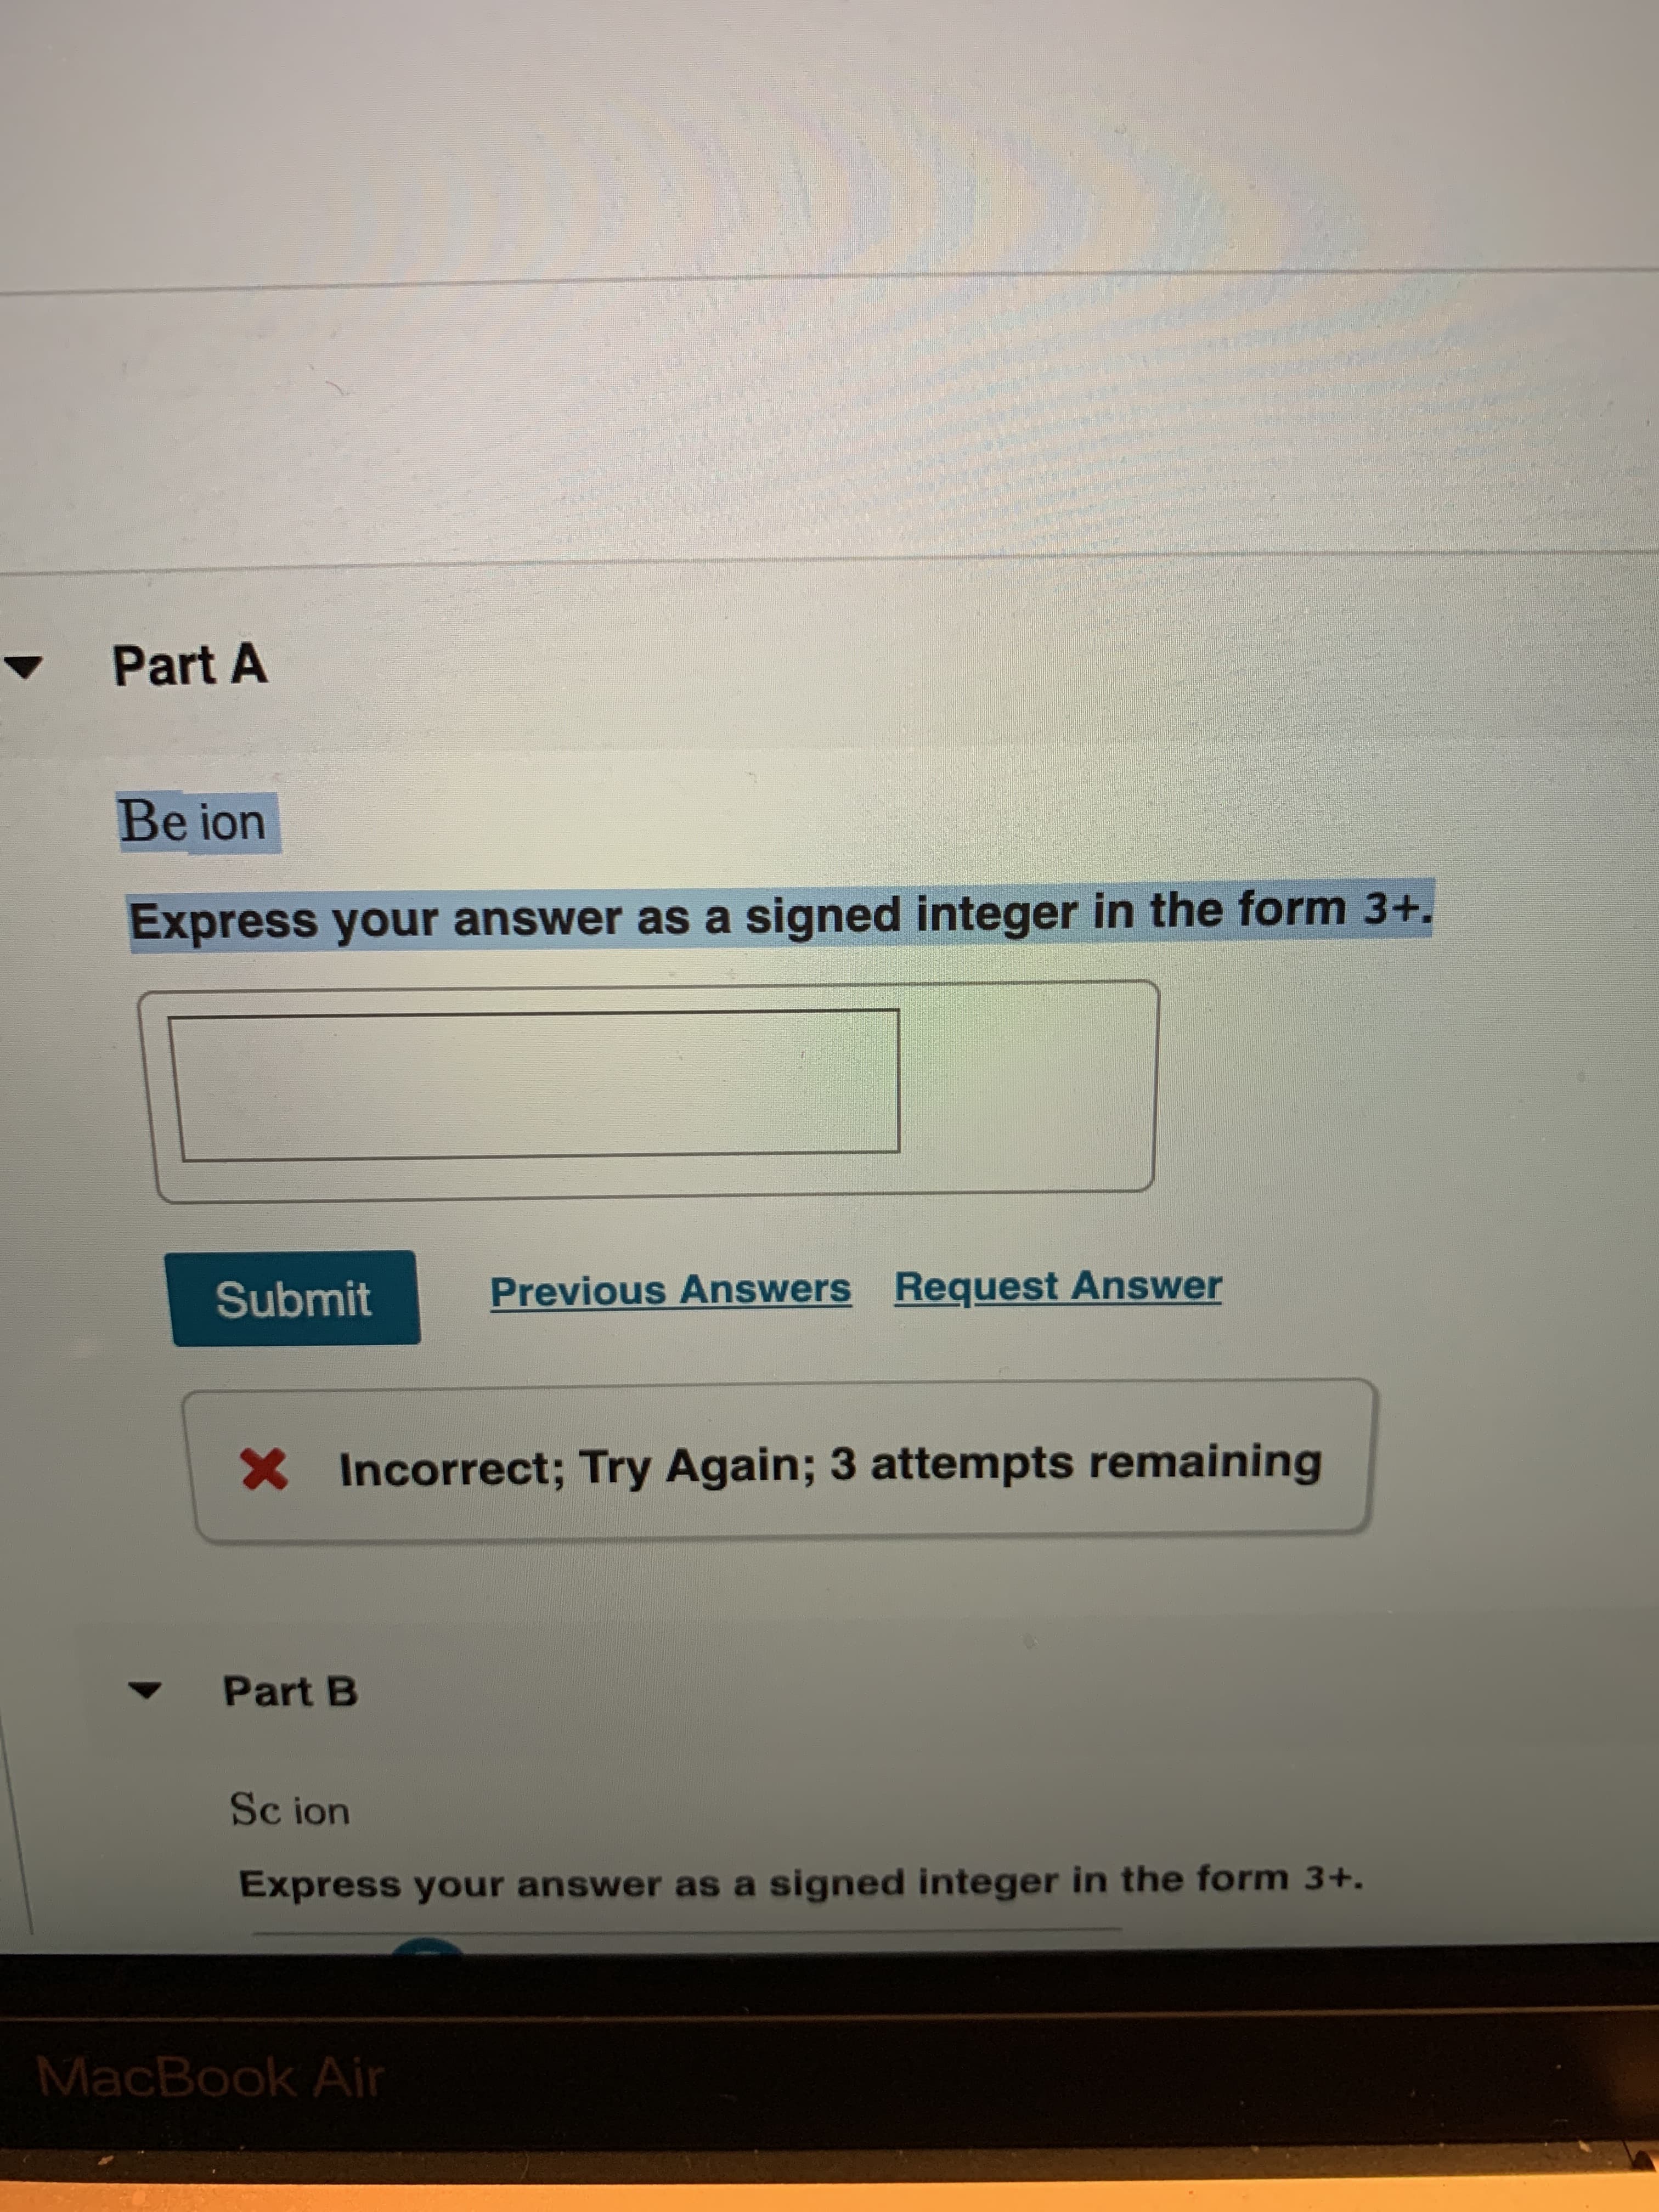 Part A
Be ion
Express your answer as a signed integer in the form 3+.
Request Answer
Previous Answers
Submit
Incorrect; Try Again; 3 attempts remaining
Part B
Sc ion
Express your answer as a signed integer in the form 3+.
MacBook Air
